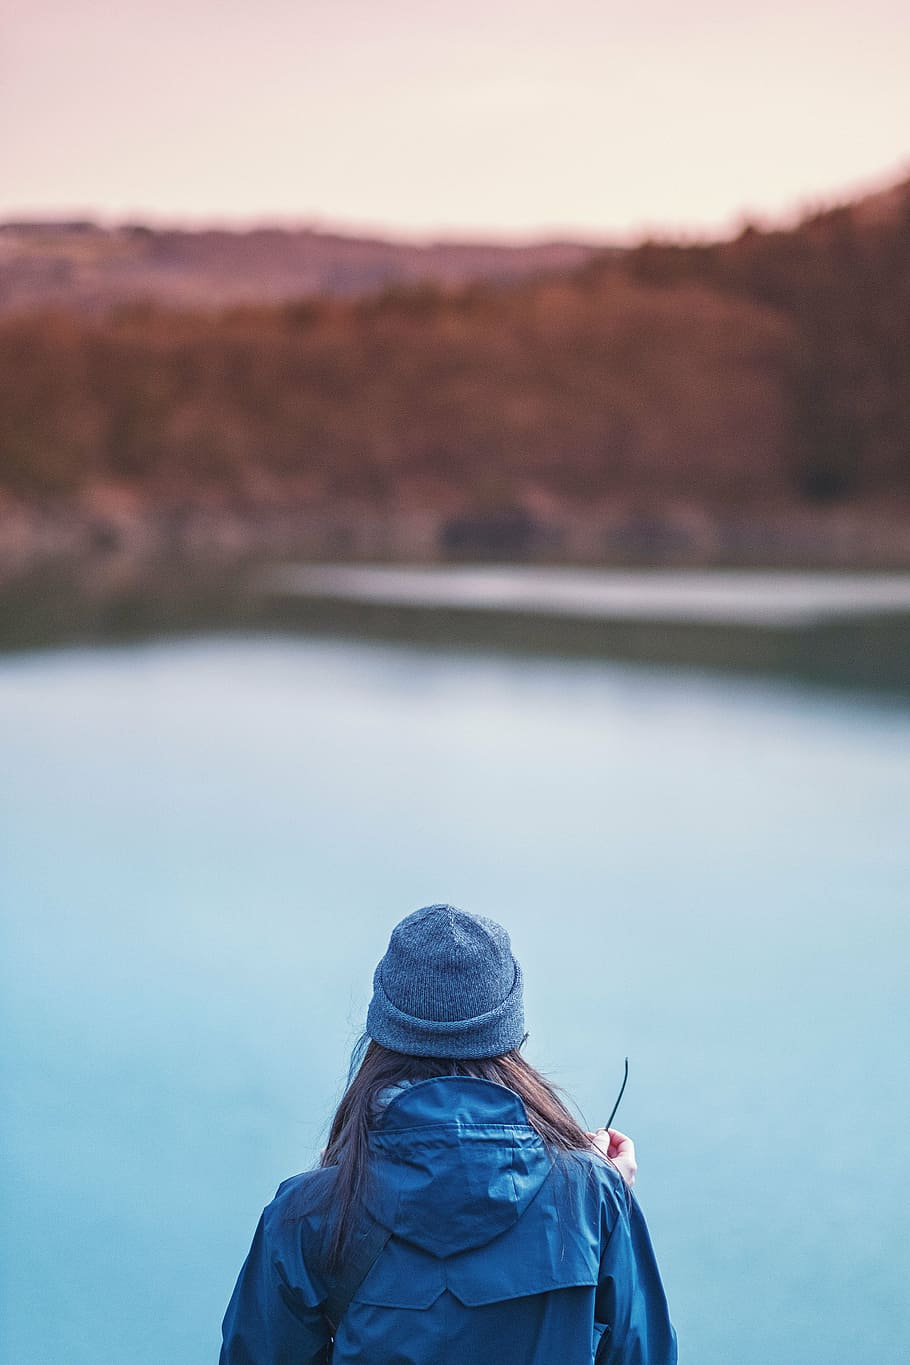 person, standing, body, water, daytime, people, girl, woman, blue, beanie